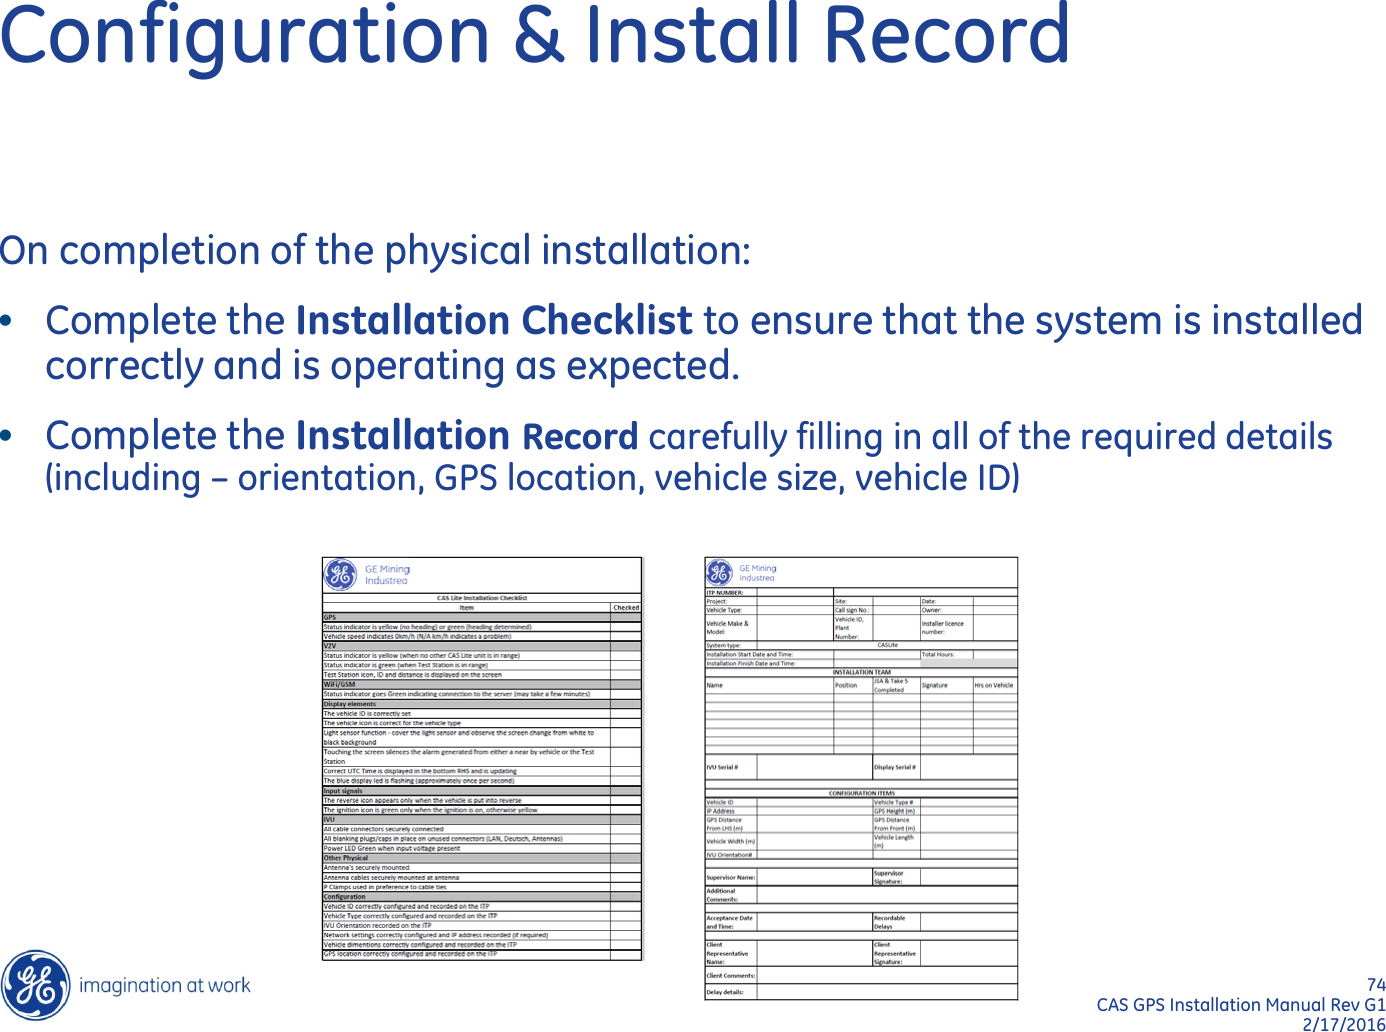 74  CAS GPS Installation Manual Rev G1 2/17/2016 Configuration &amp; Install Record On completion of the physical installation: •Complete the Installation Checklist to ensure that the system is installed correctly and is operating as expected. •Complete the Installation Record carefully filling in all of the required details (including – orientation, GPS location, vehicle size, vehicle ID)  